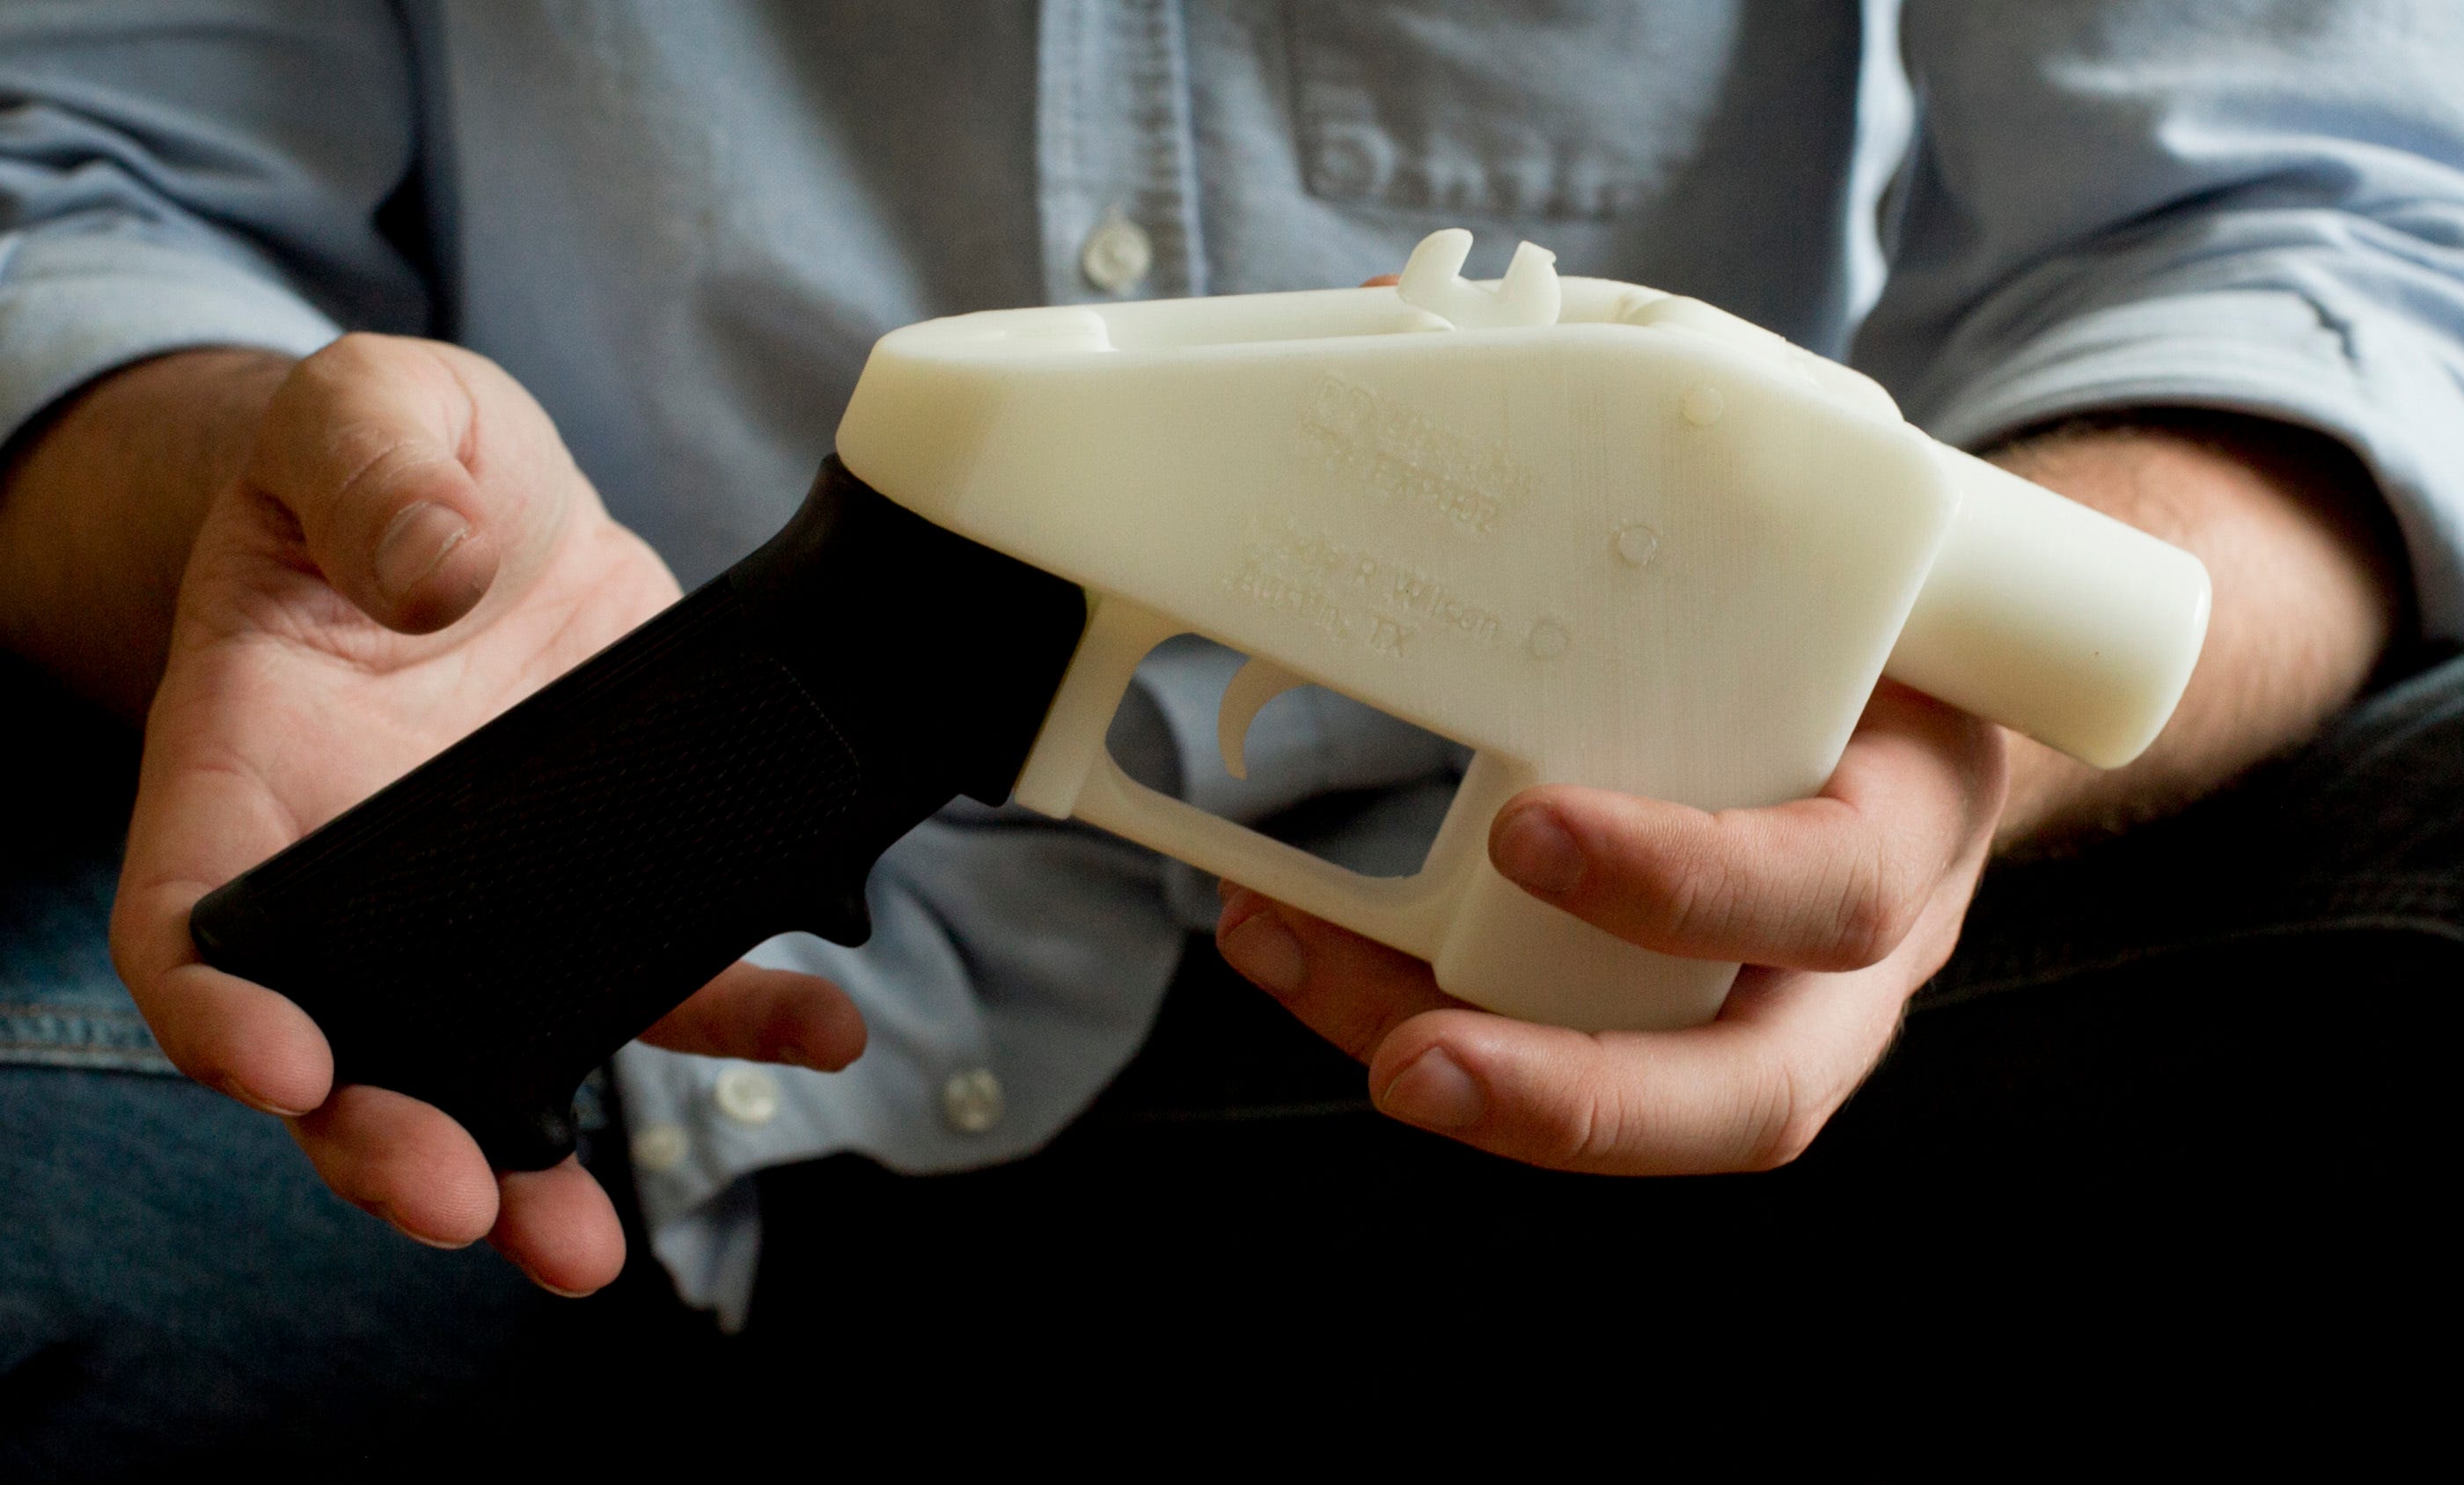 federal-judge-3d-printable-guns-are-an-issue-for-congress-or-the